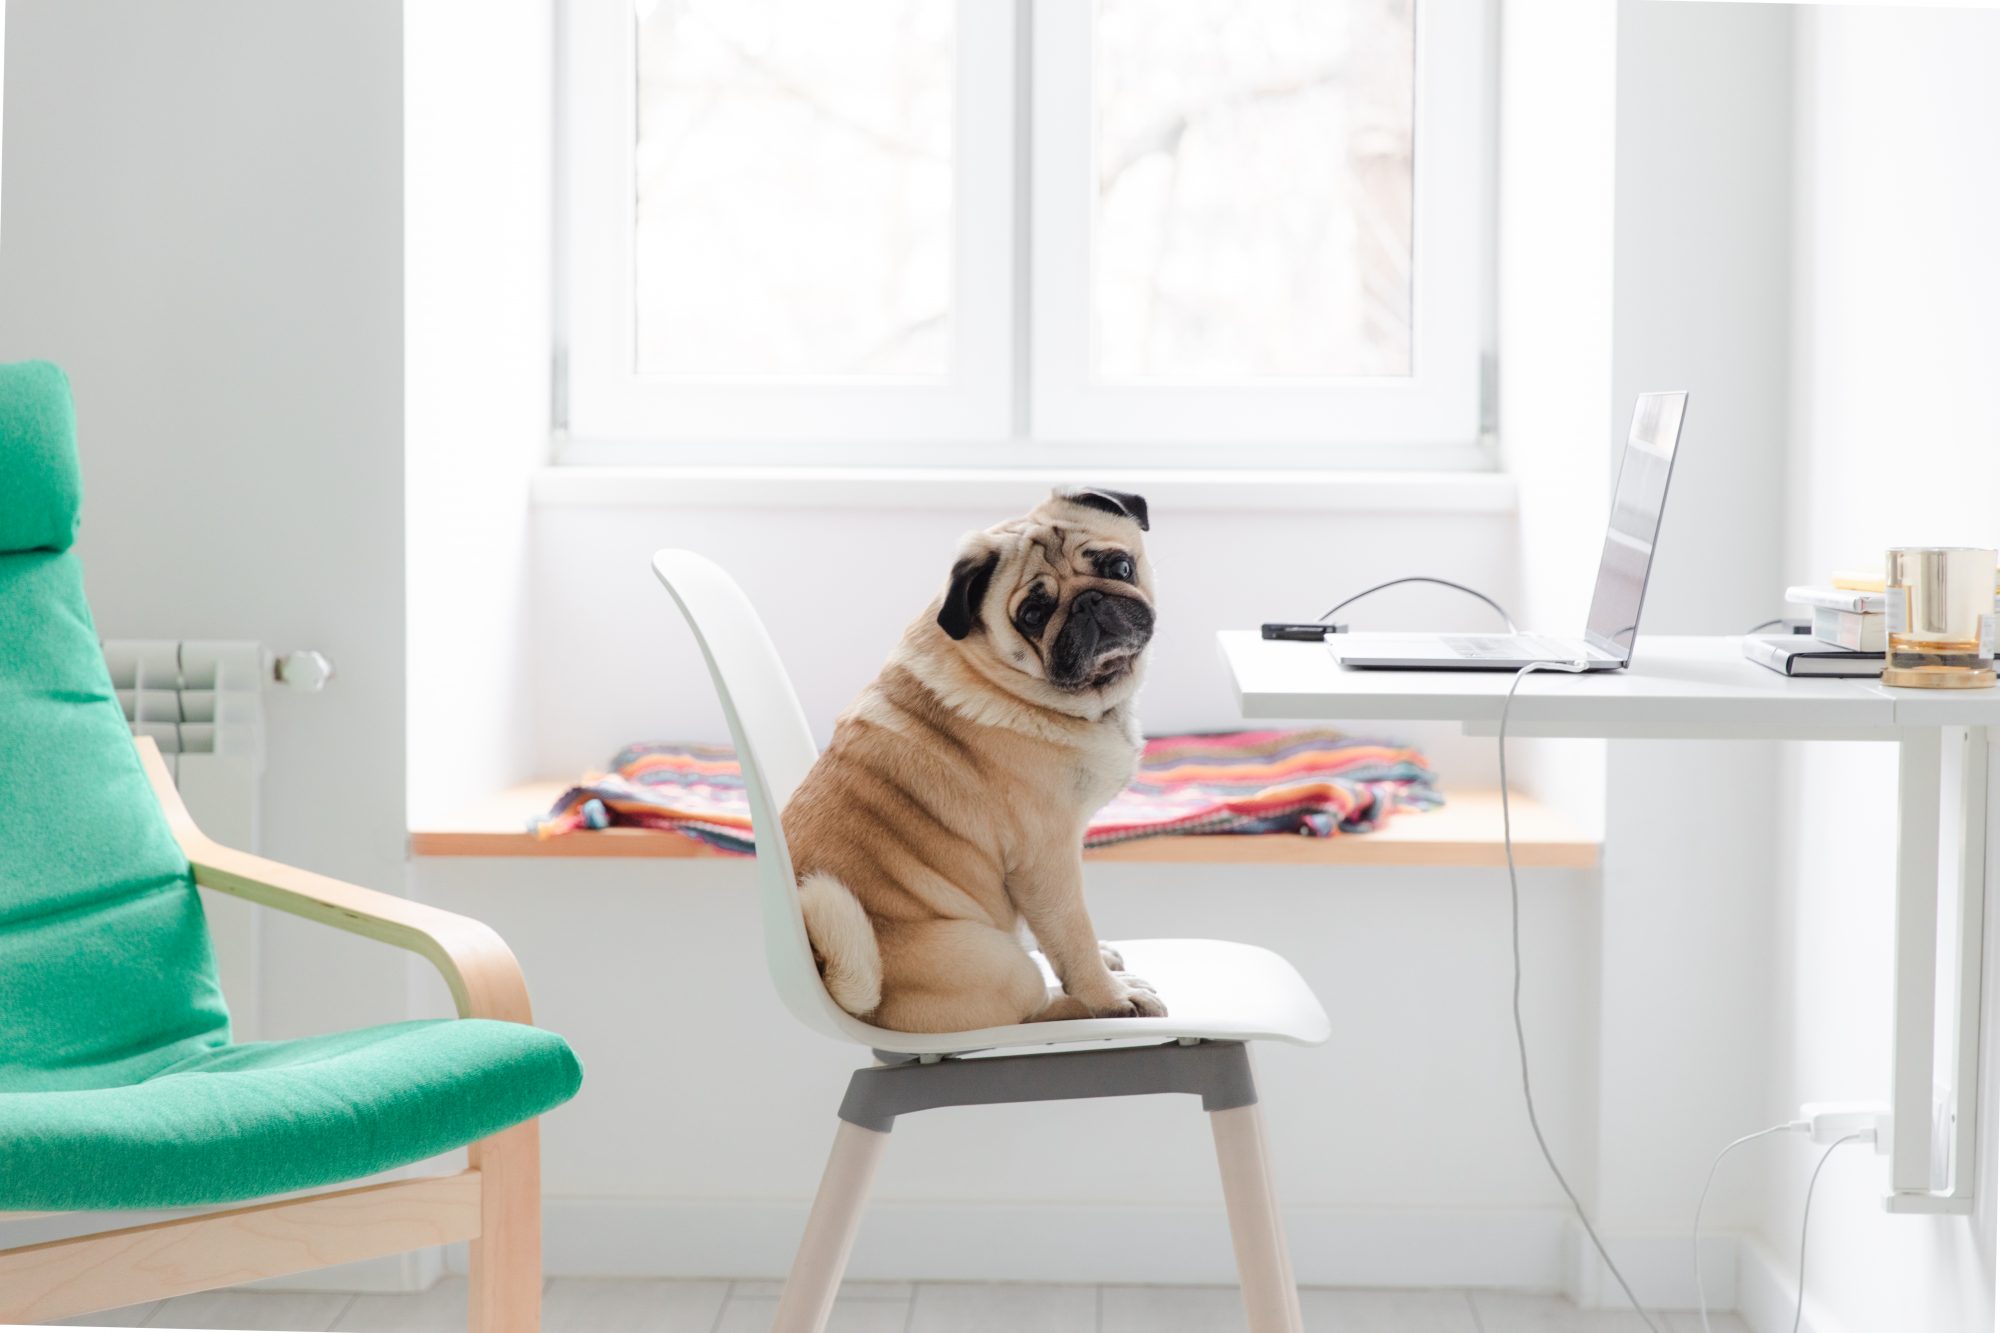 A dog sits on an office chair in front of a computer